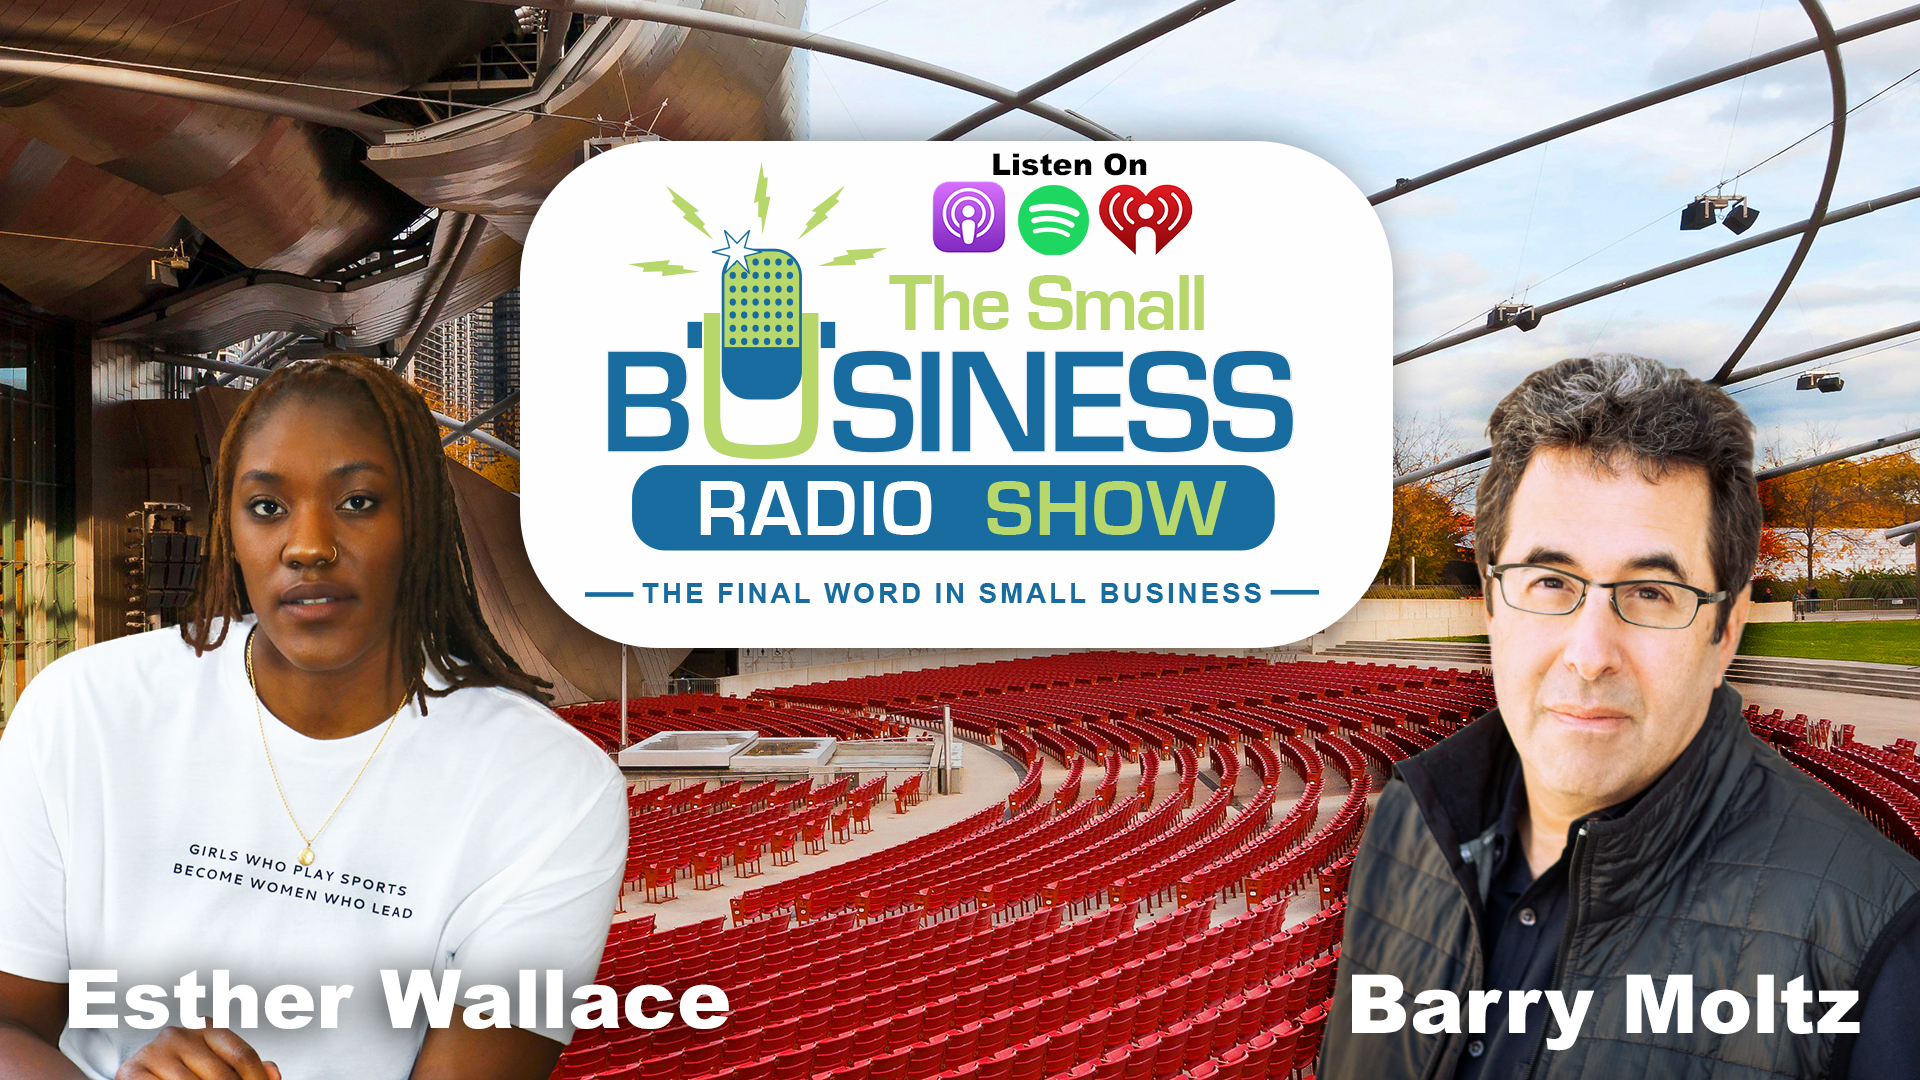 Esther Wallace on The Small Business Radio Show